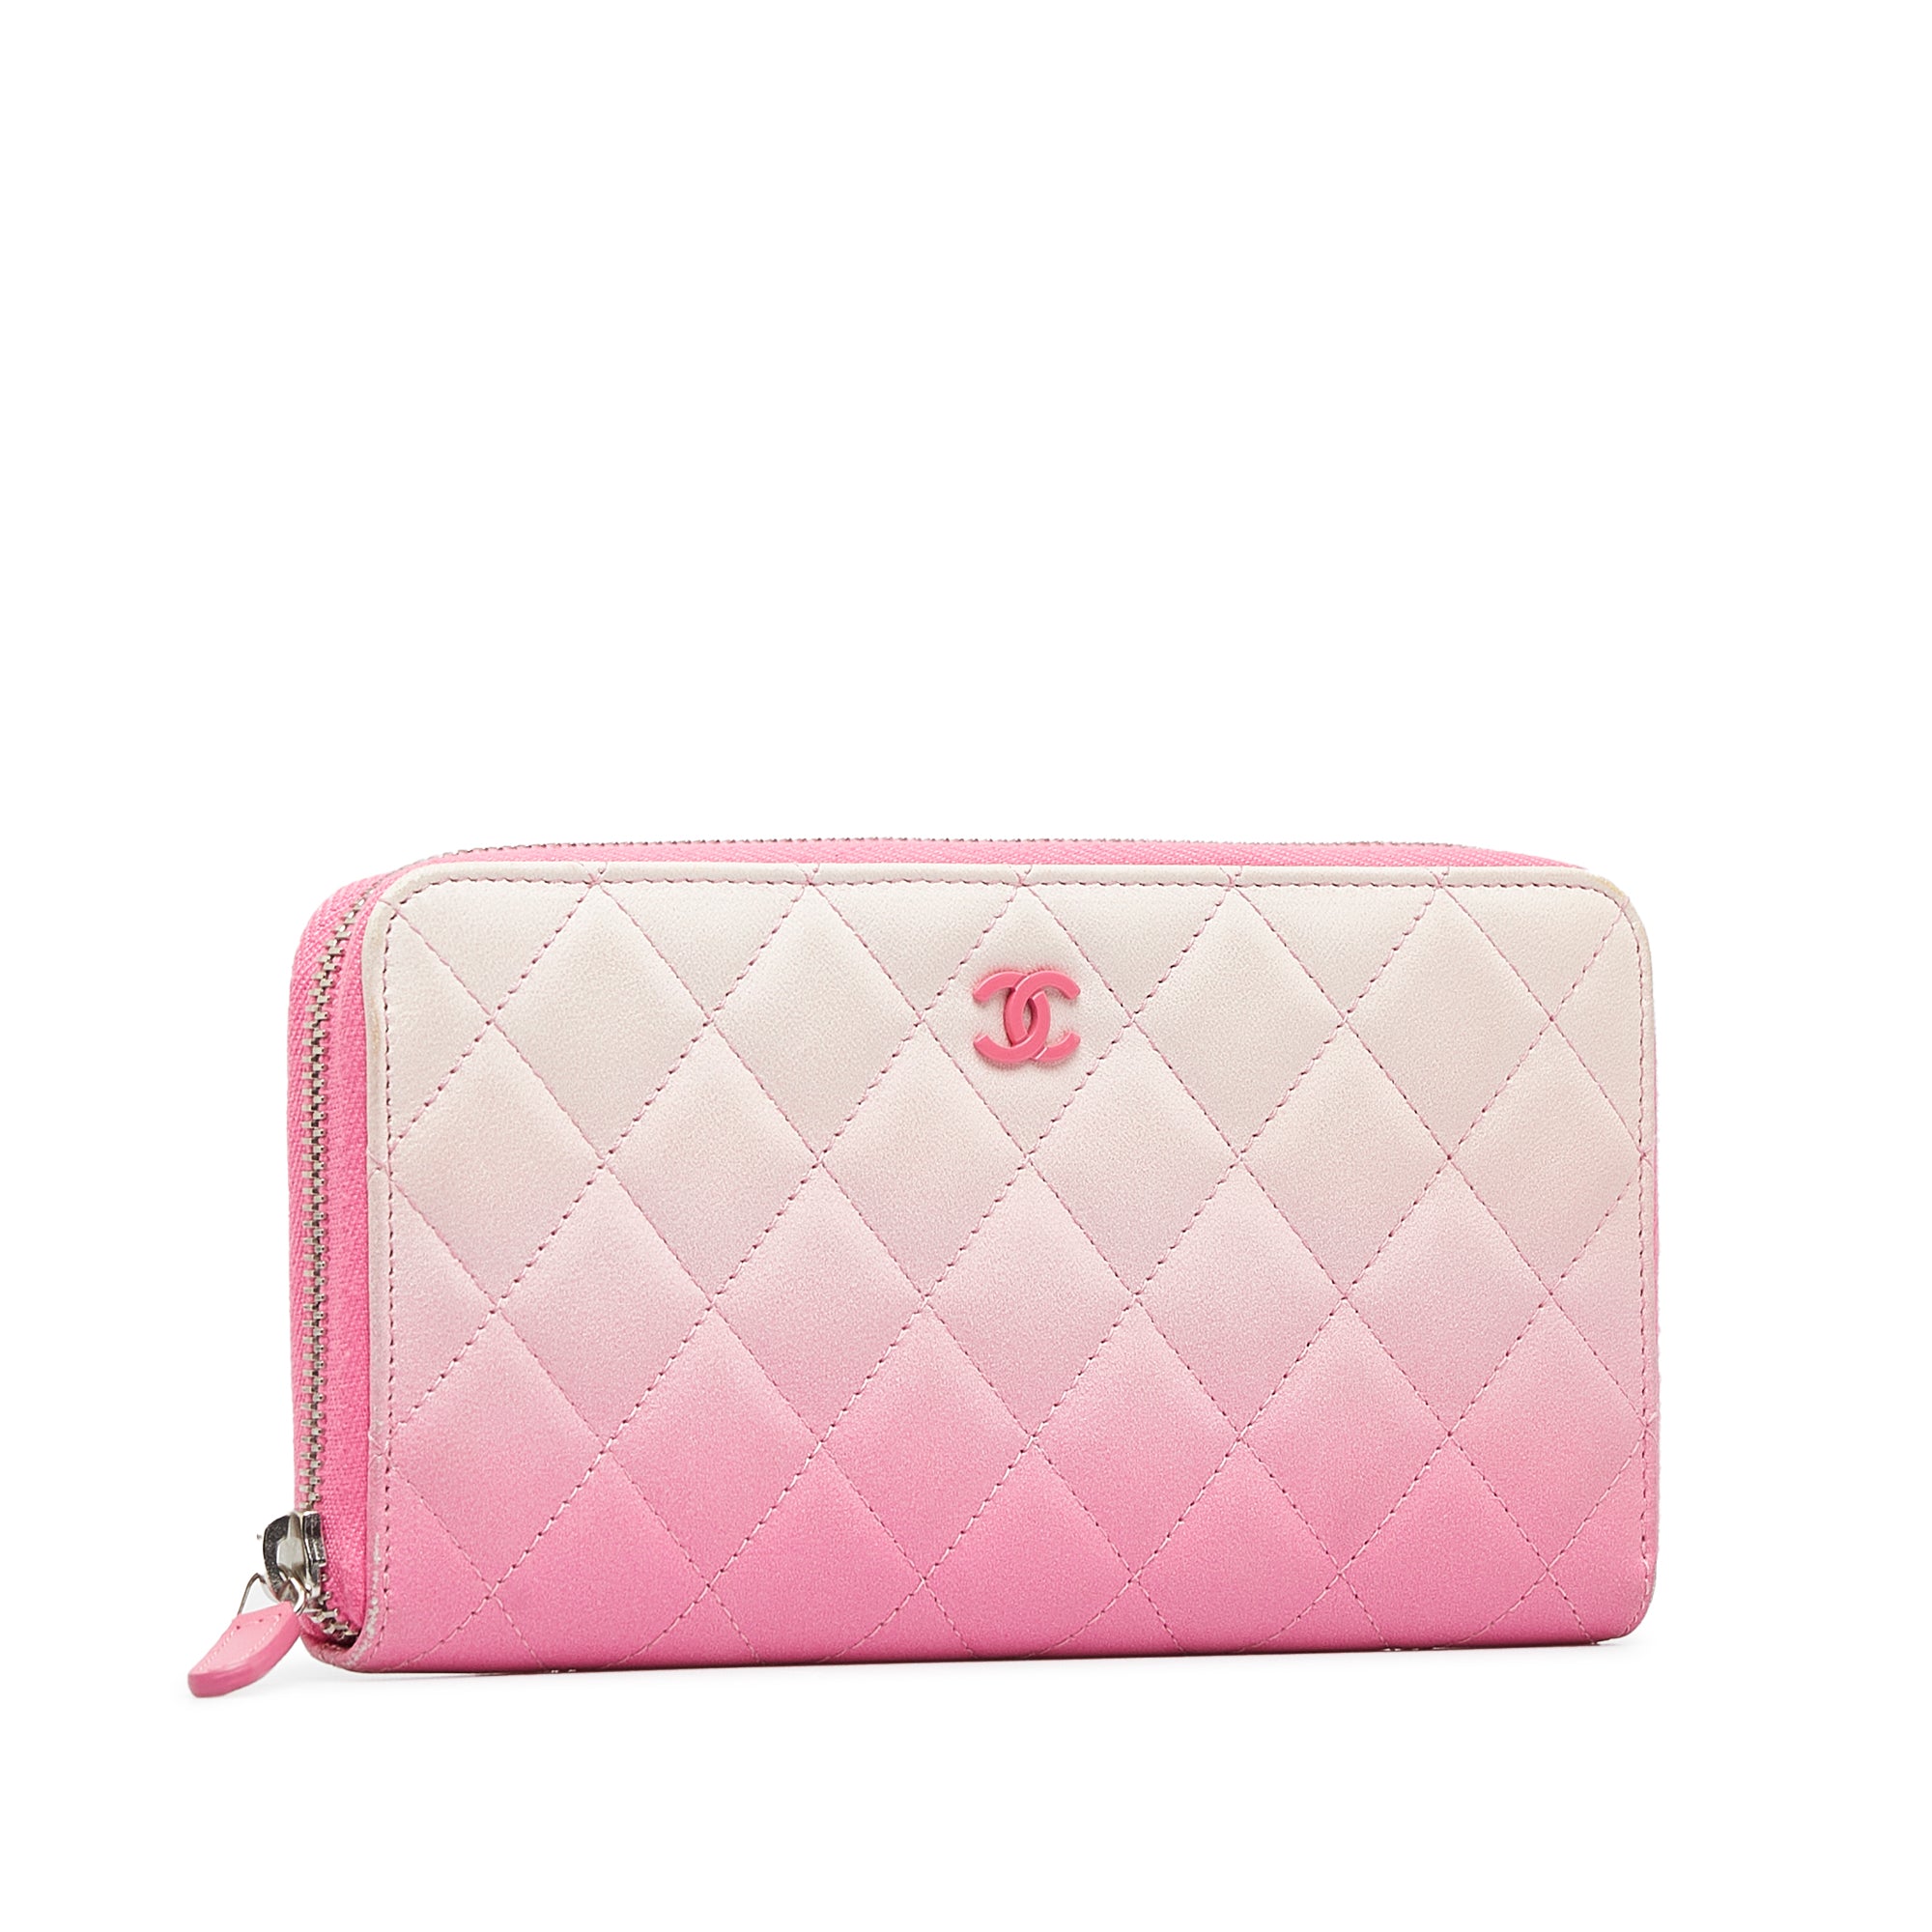 Chanel Pink Quilted Patent Leather L Yen Wallet